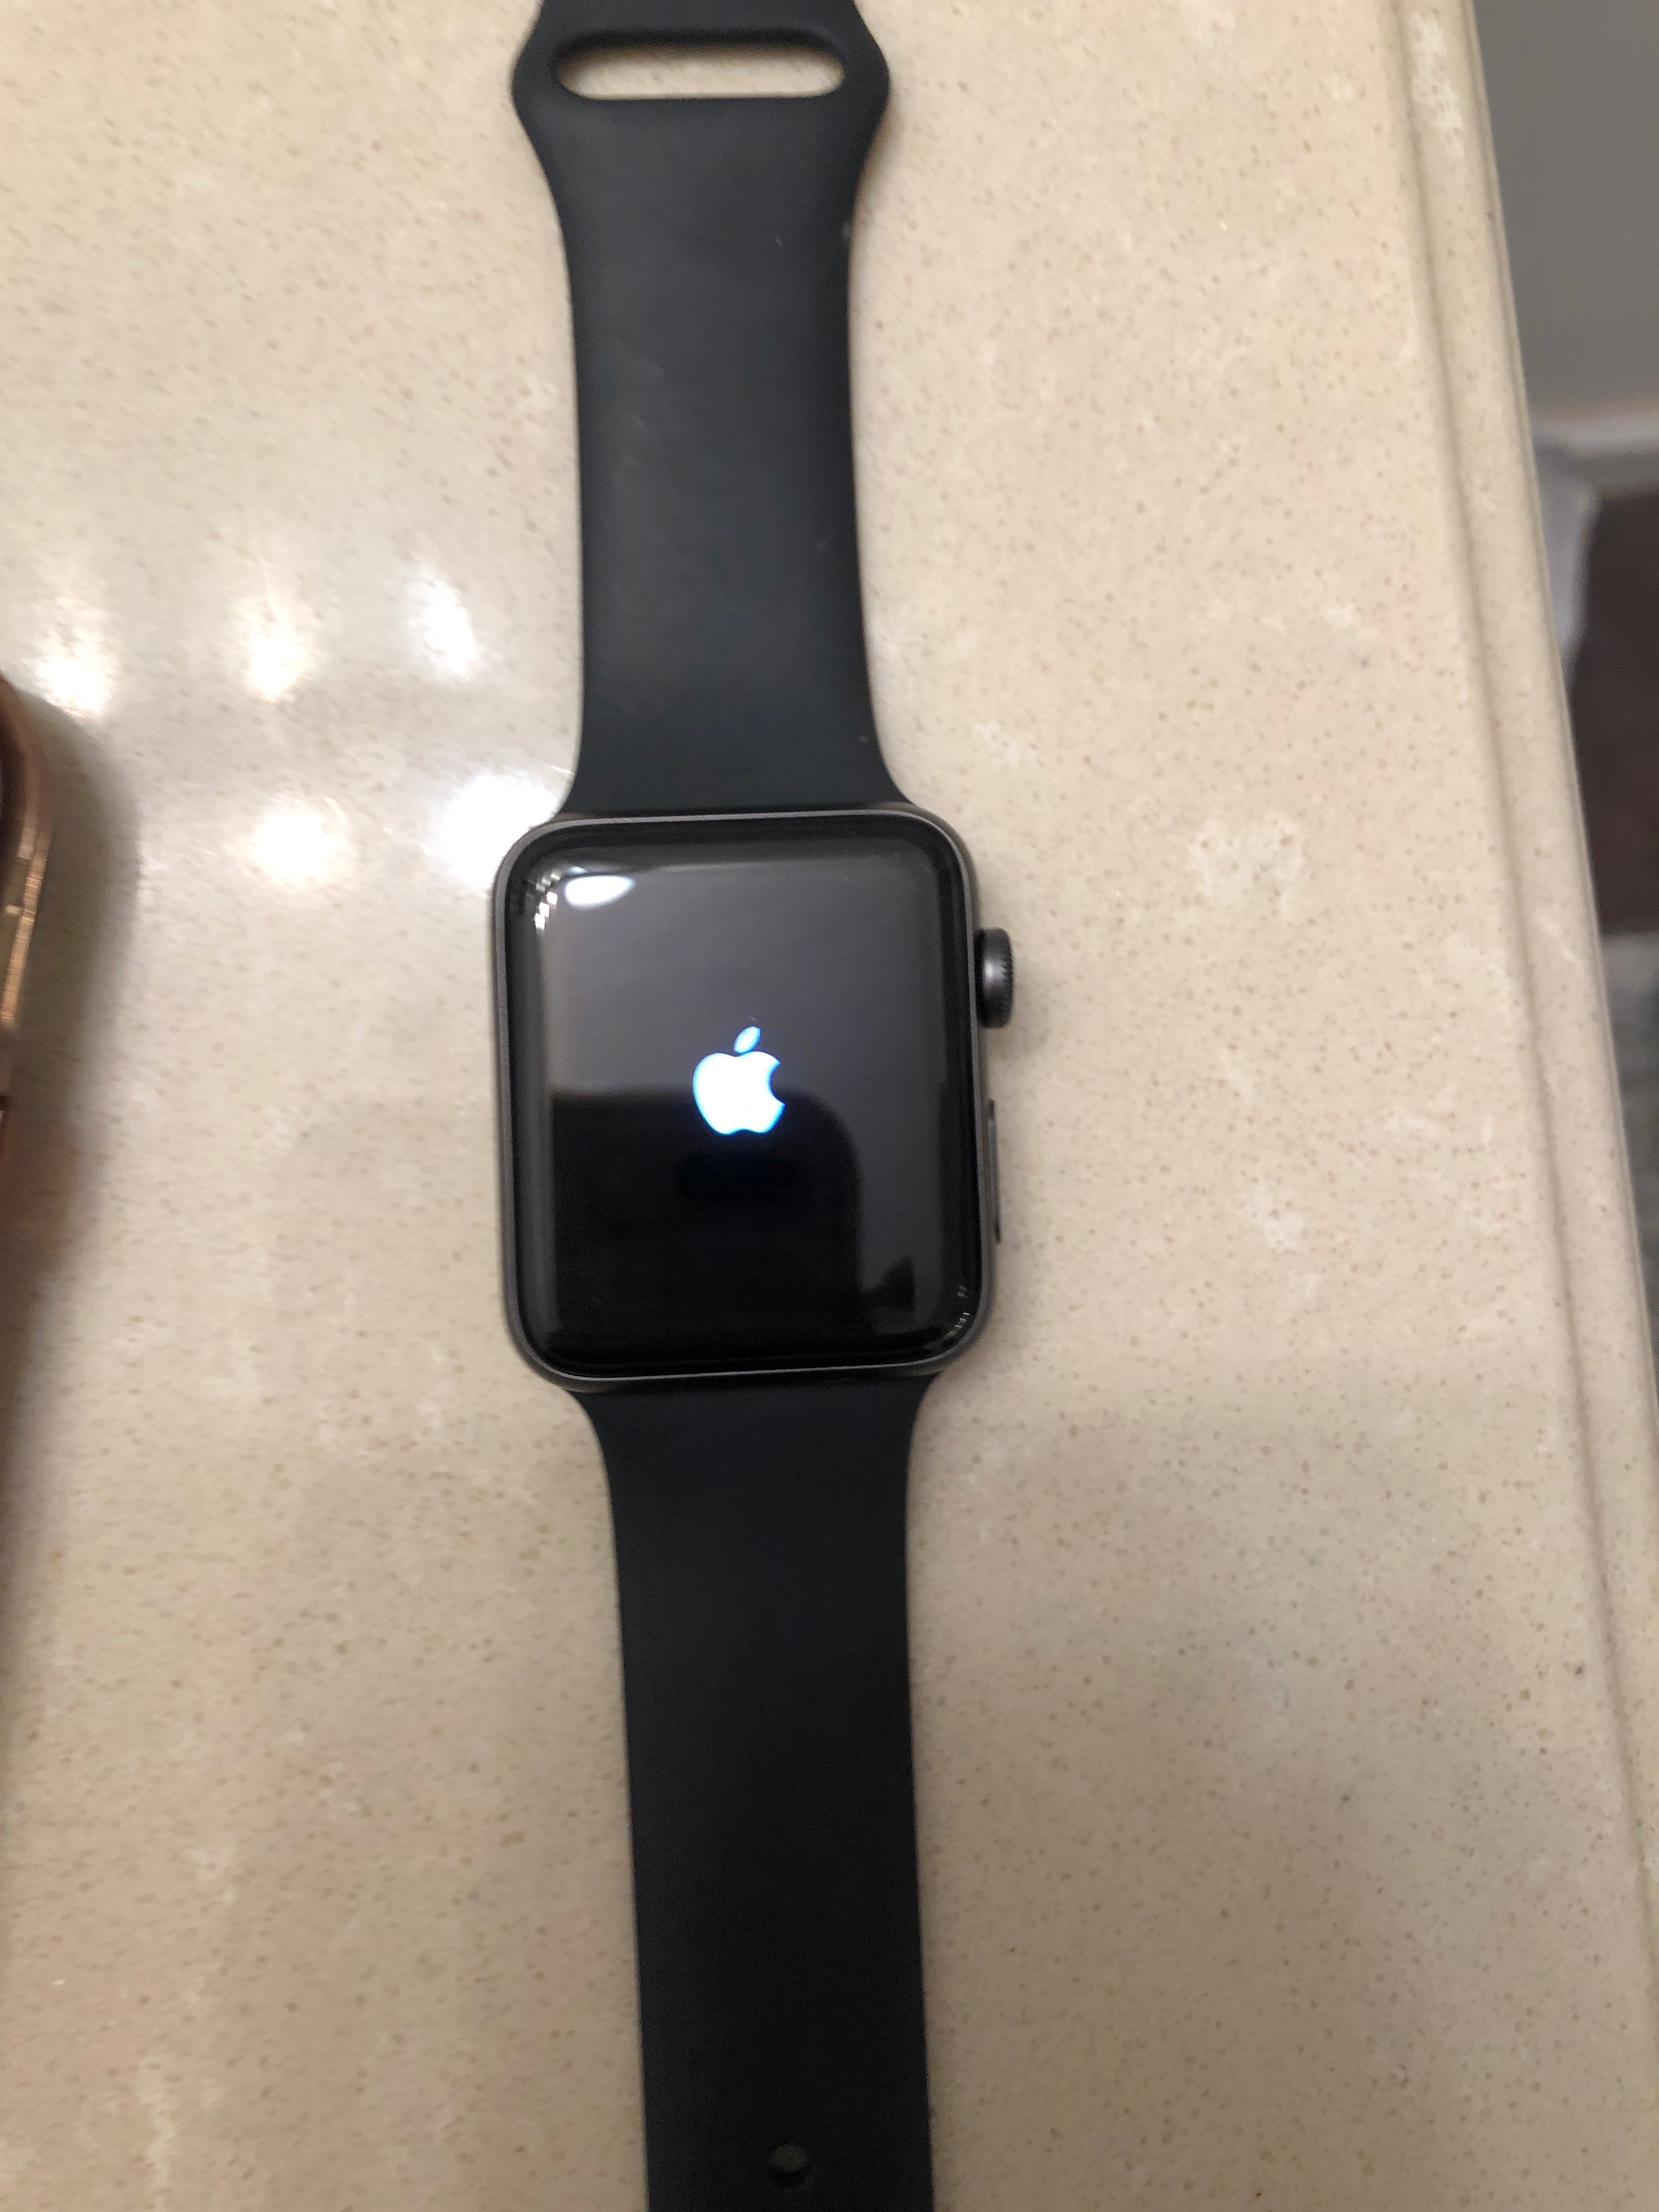 Why is my apple watch frozen on the apple logo Is Your Apple Watch Stuck On The Apple Logo Here S How To Fix It